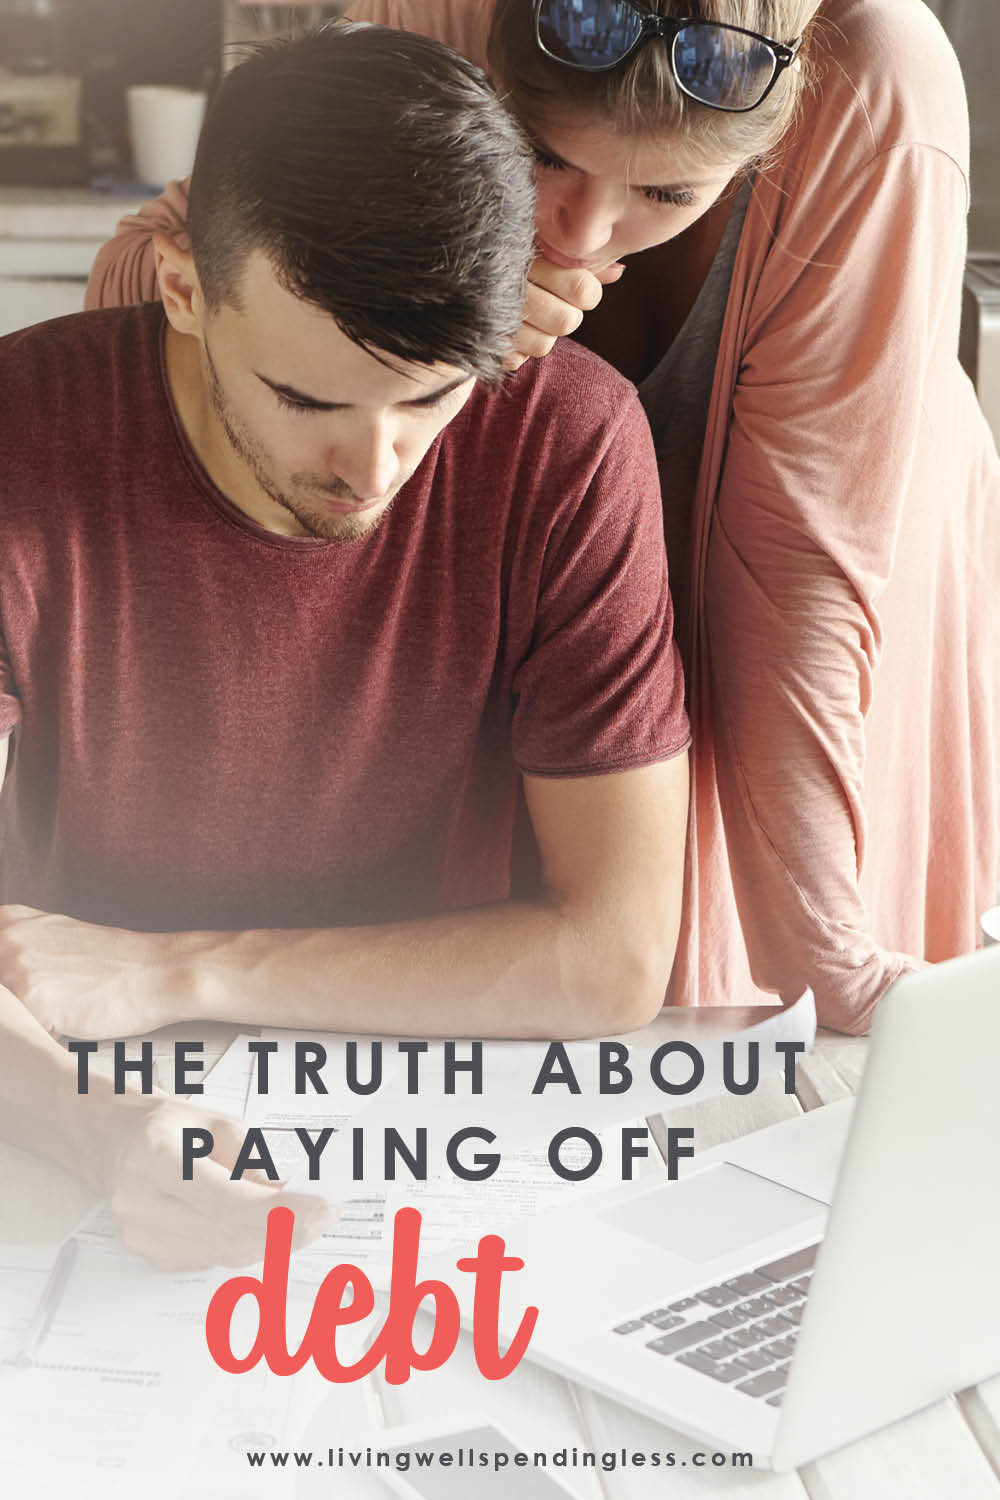 Paying off debt can be hard! If you've been feeling weary, don't miss these helpful insights on learning to navigate the good, the bad and the ugly. #payingoffdebt #payoffdebt #debtfreeliving #debtfree #budgeting #budgettips #moneysavingtips #savingmoney